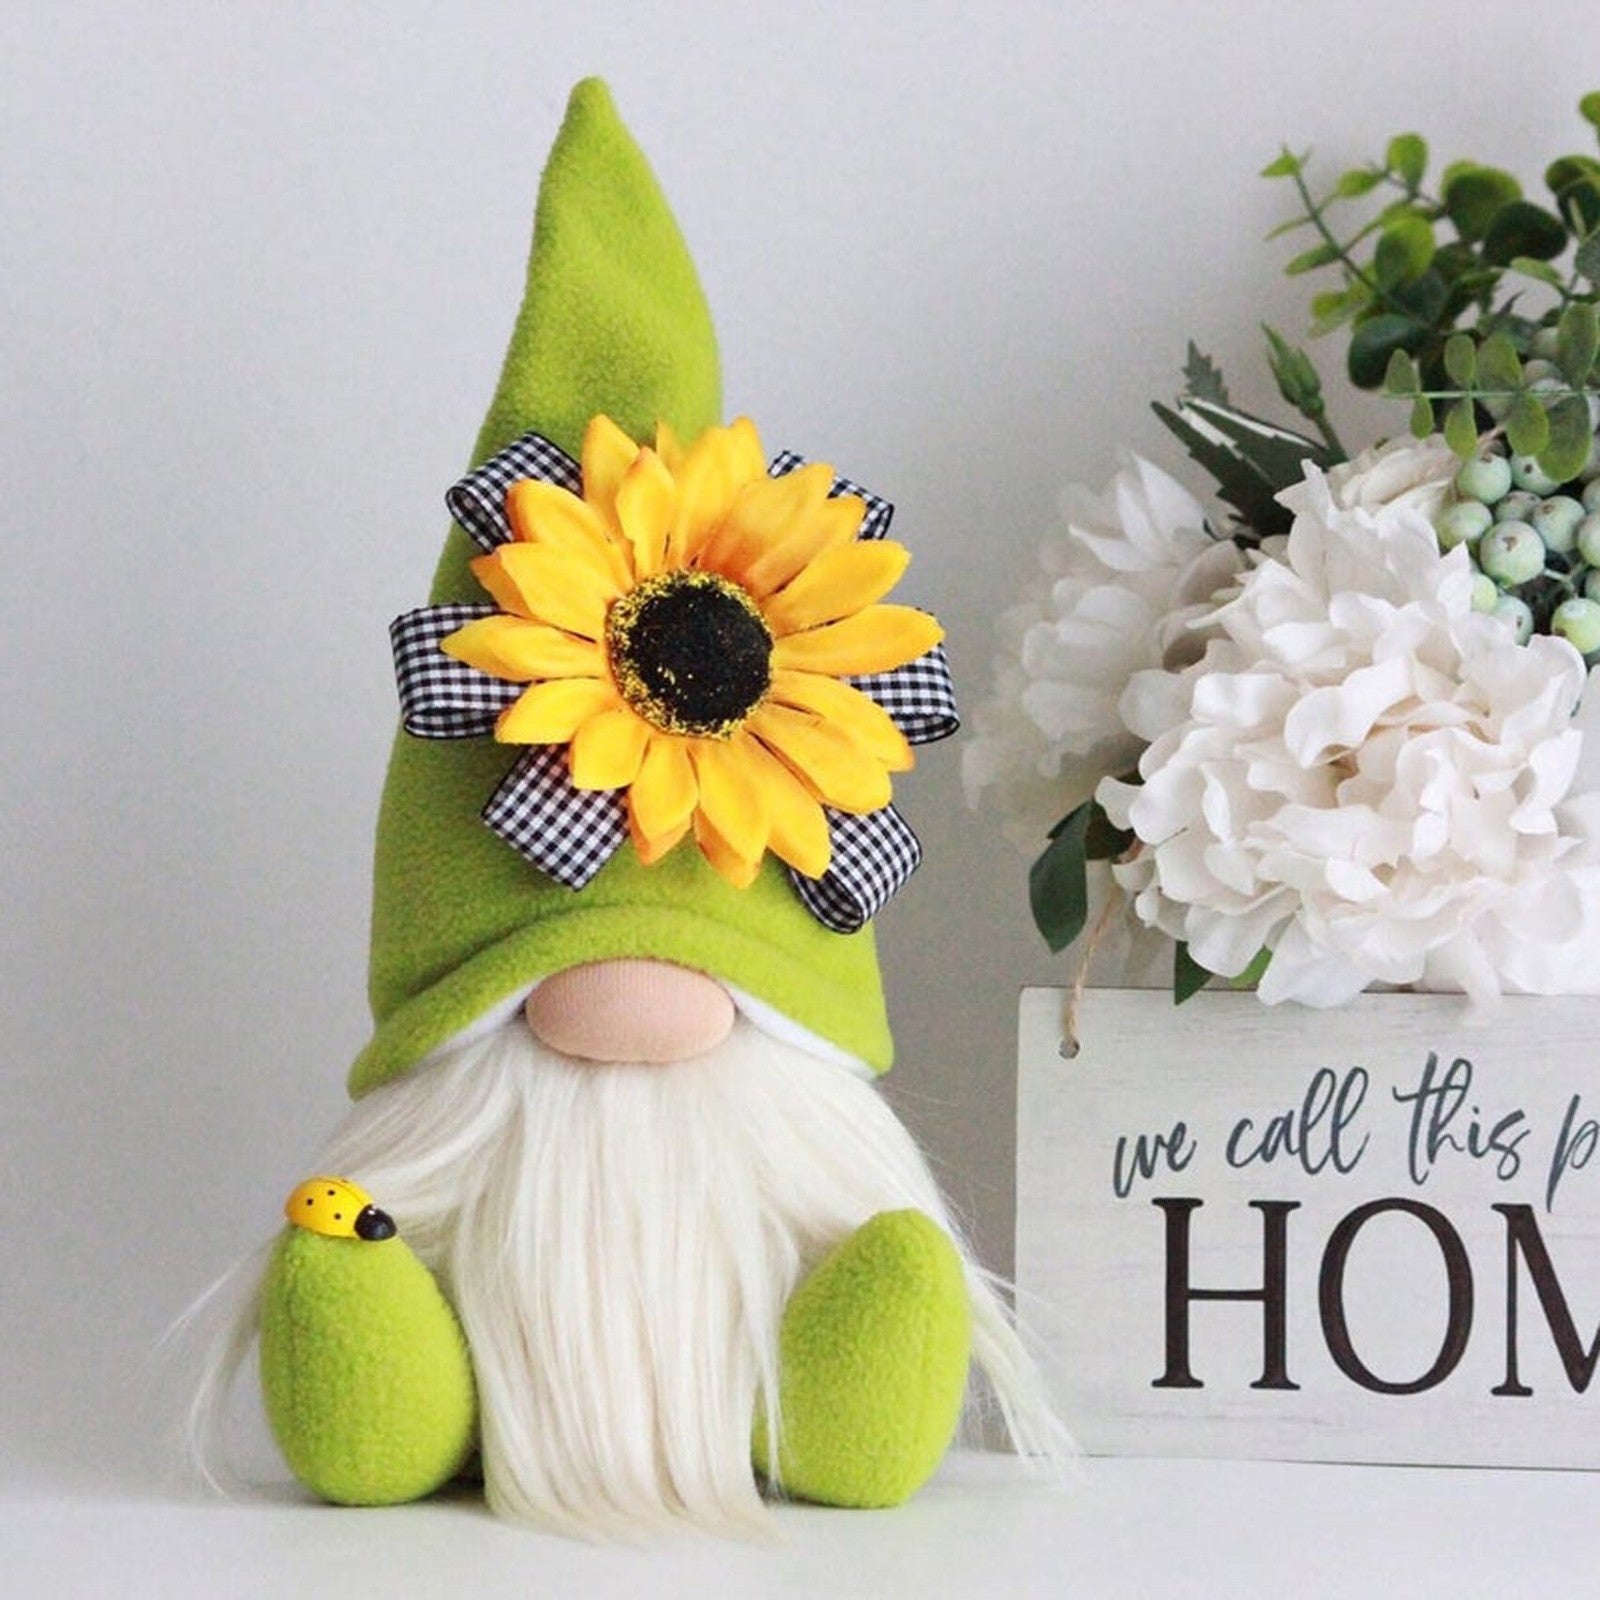 Here Is Various Type Of Honey Bee Gnomes, Bumble Bee Gnomes, Honey Bee Gnomes Fabric, Honey Bee Gnomes Quilt Pattern, Ceramic Bee Gnome, Bee Garden Gnome, Diy Bee Gnomes, Bee Happy gnomes, Bee Kind Gnome, Bee Hive Gnomes, Bumblebee gnome, Bee Gnomes For Sale, Bee Happy Gnome, DIY Gnomes